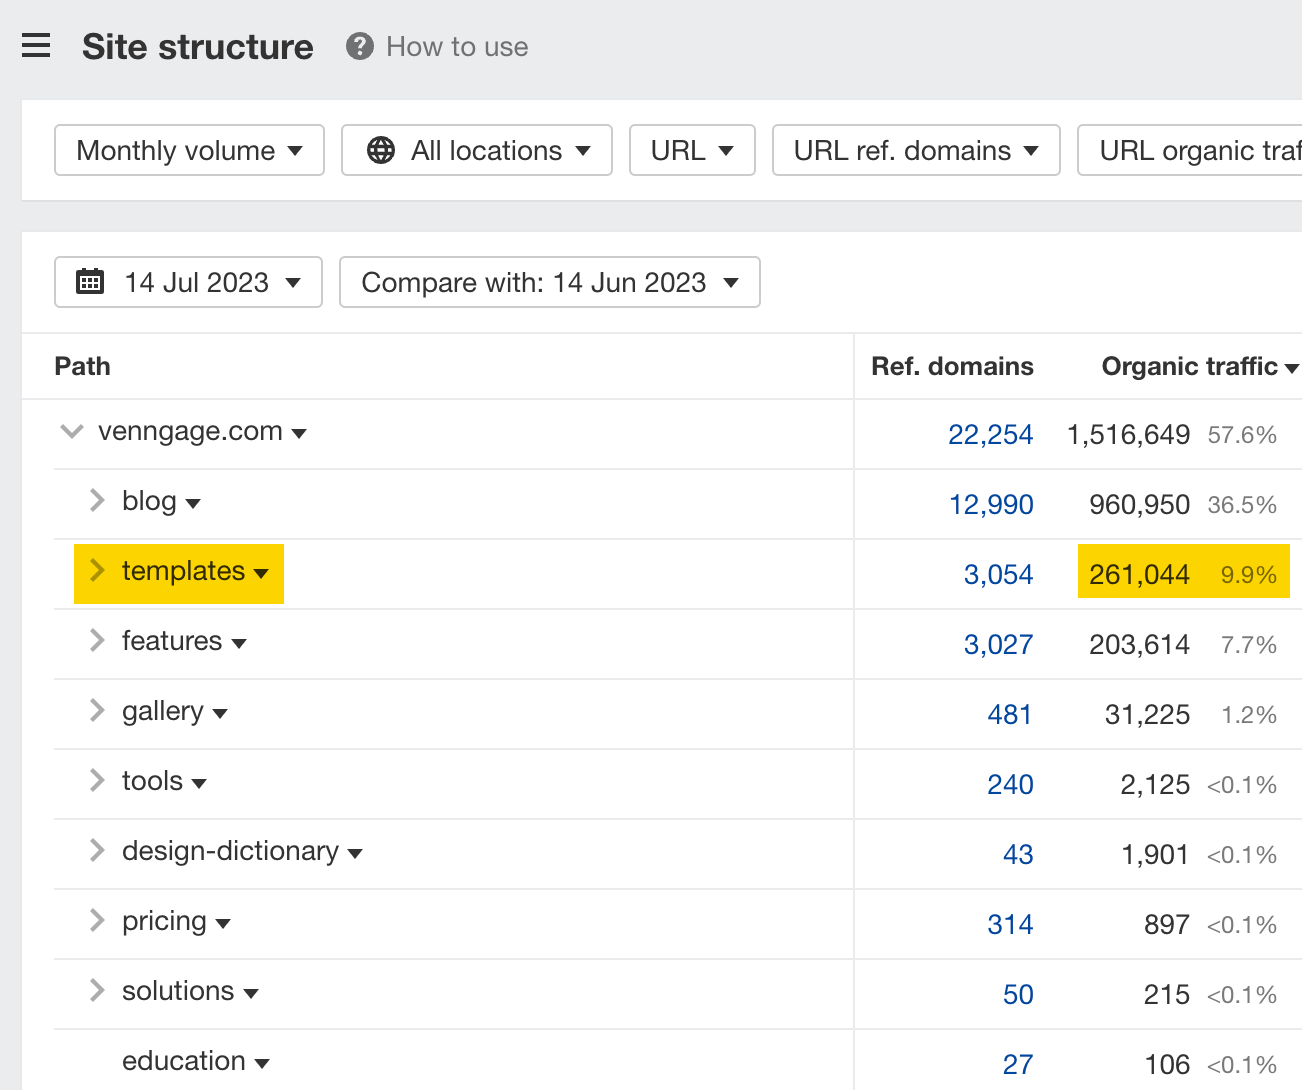 Ahrefs' Site structure report shows how a website is structured 